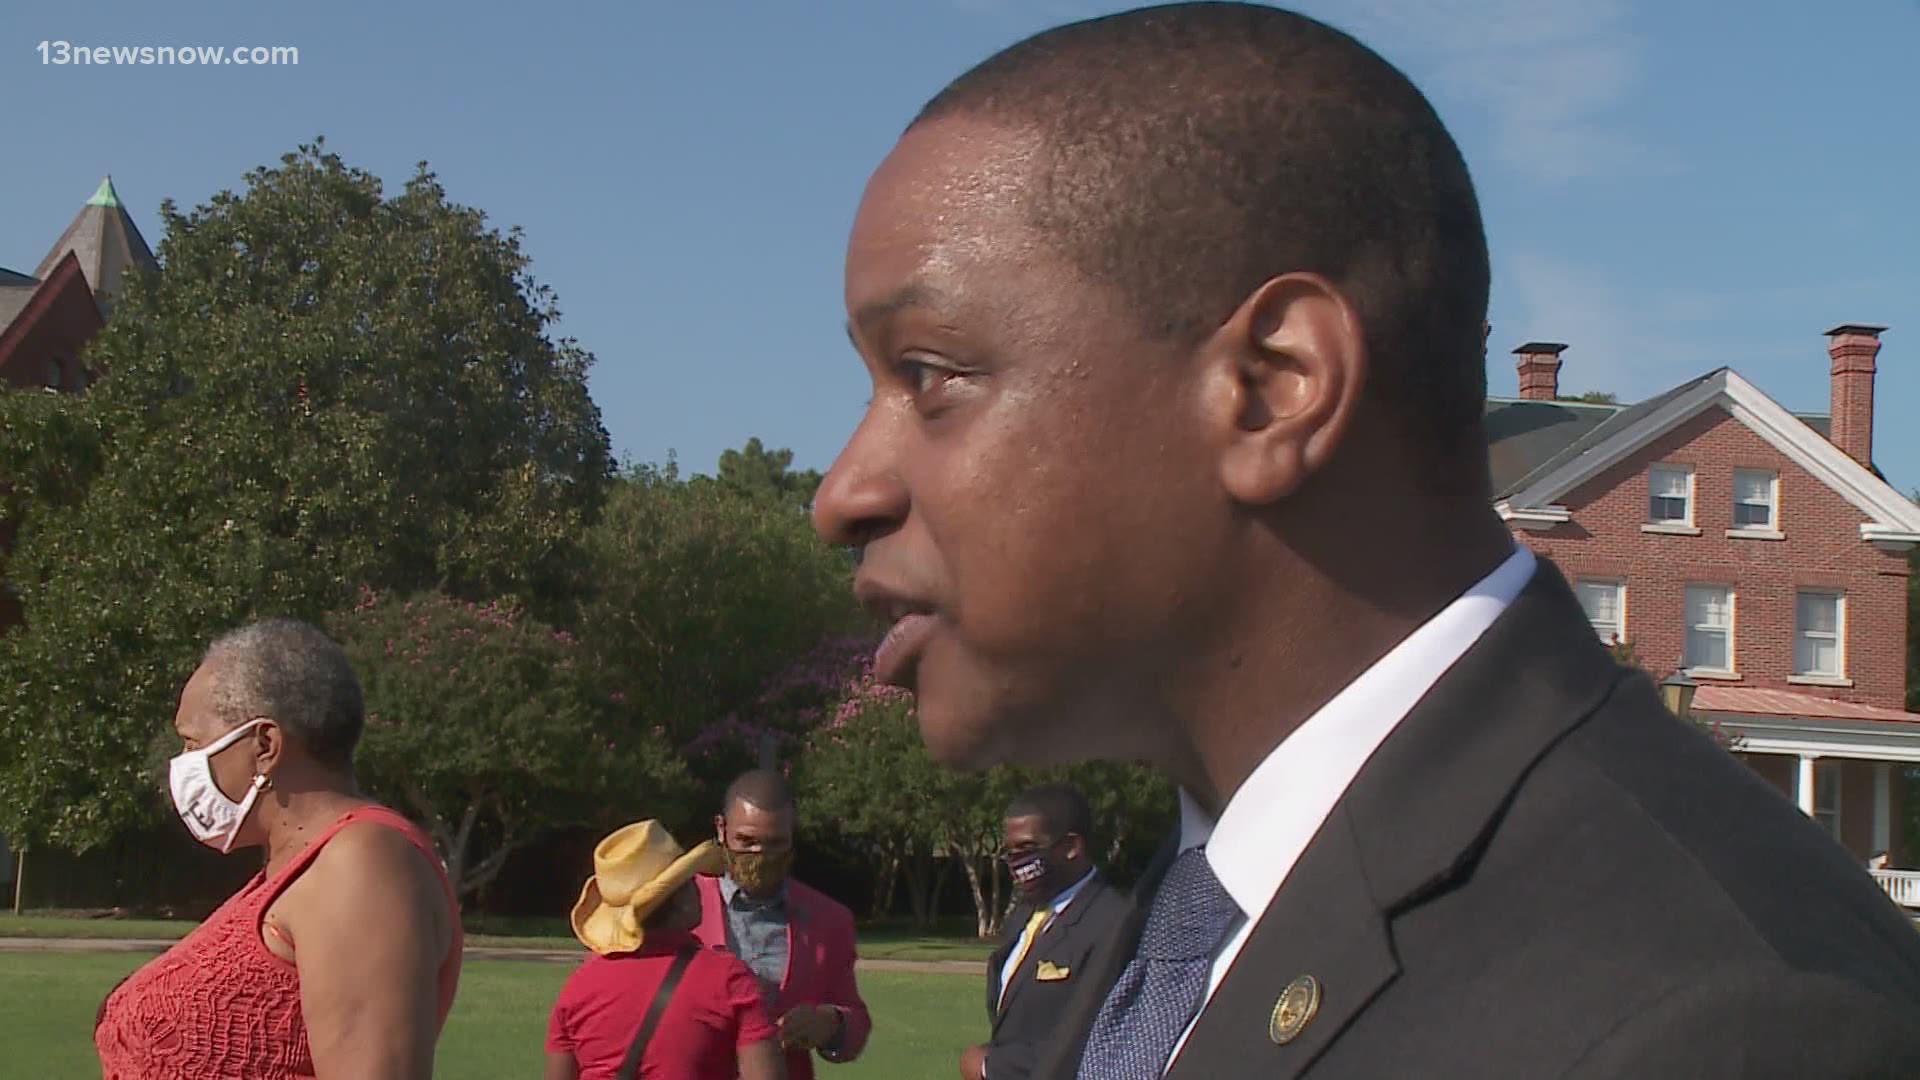 Virginia Lt. Gov. Justin Fairfax is launching a run for governor.